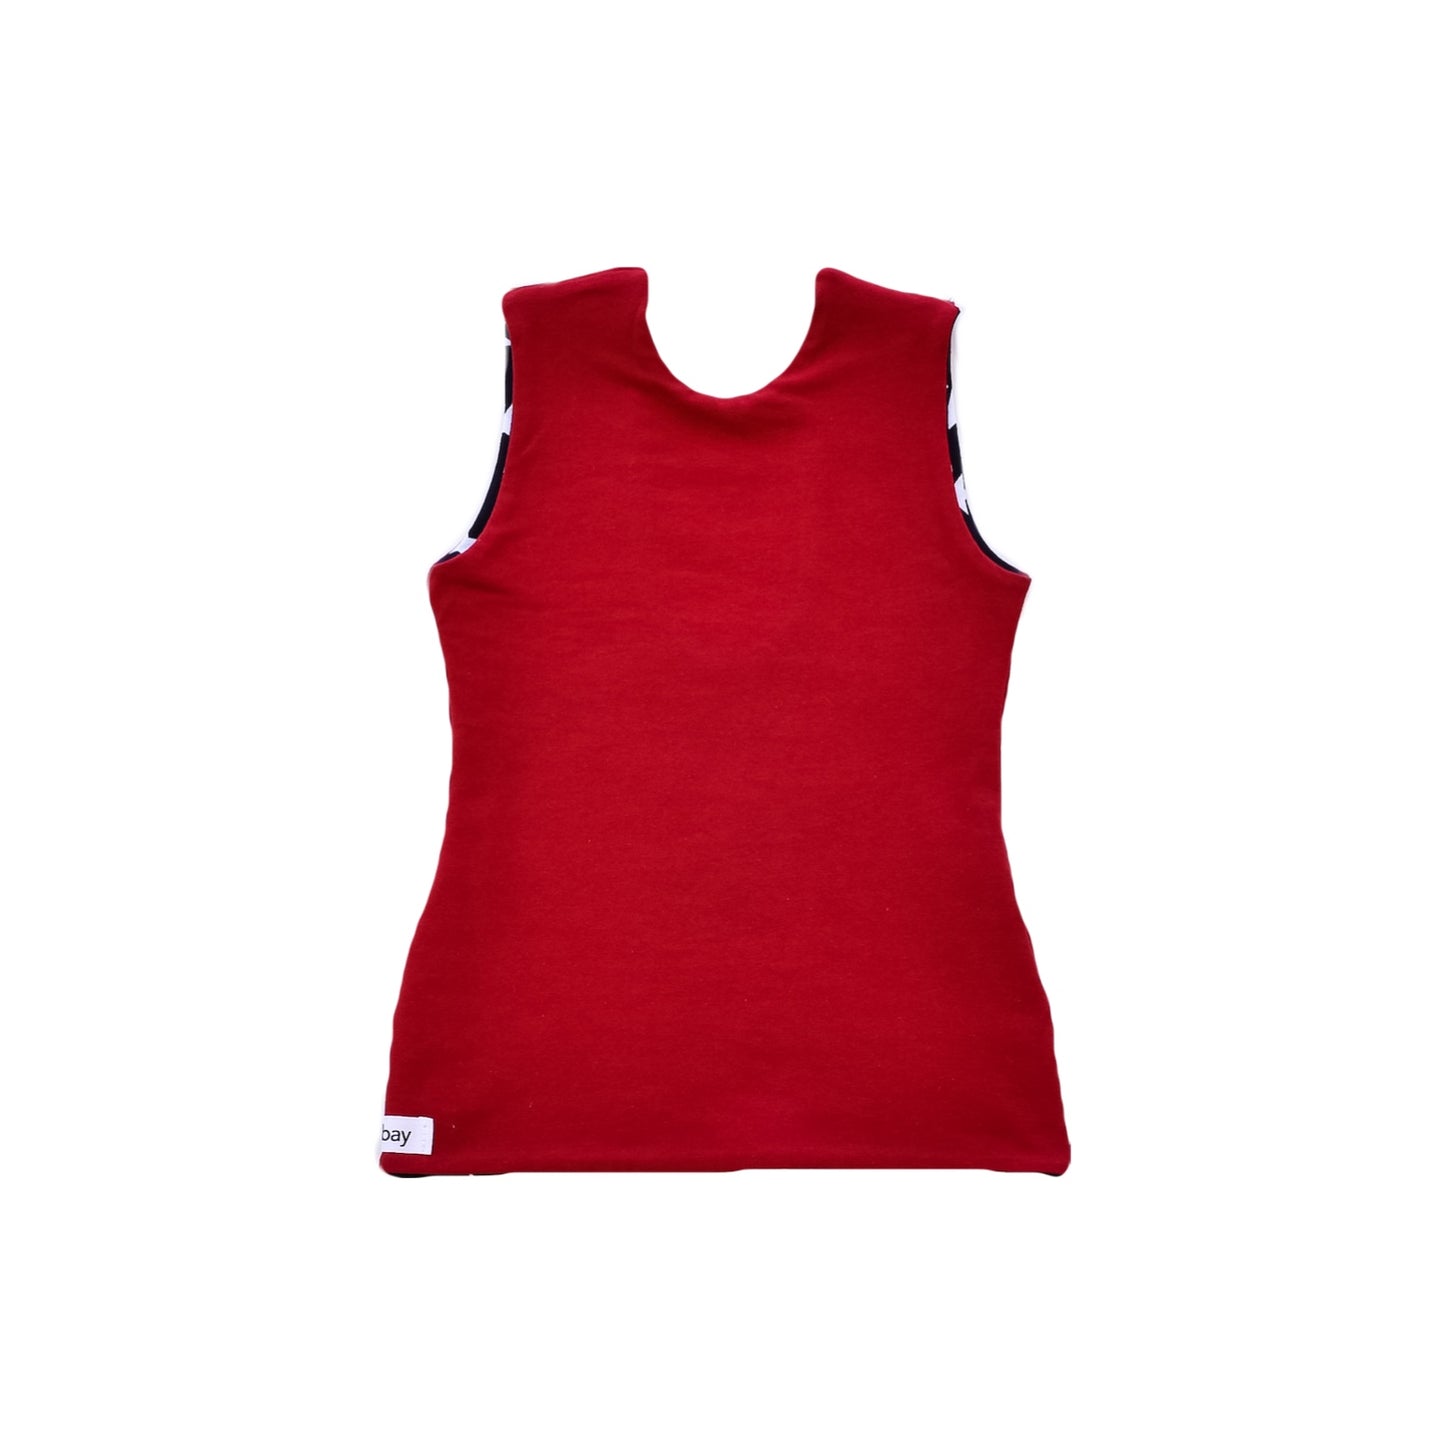 Fitted Top - Red/Stars  (Reversible)